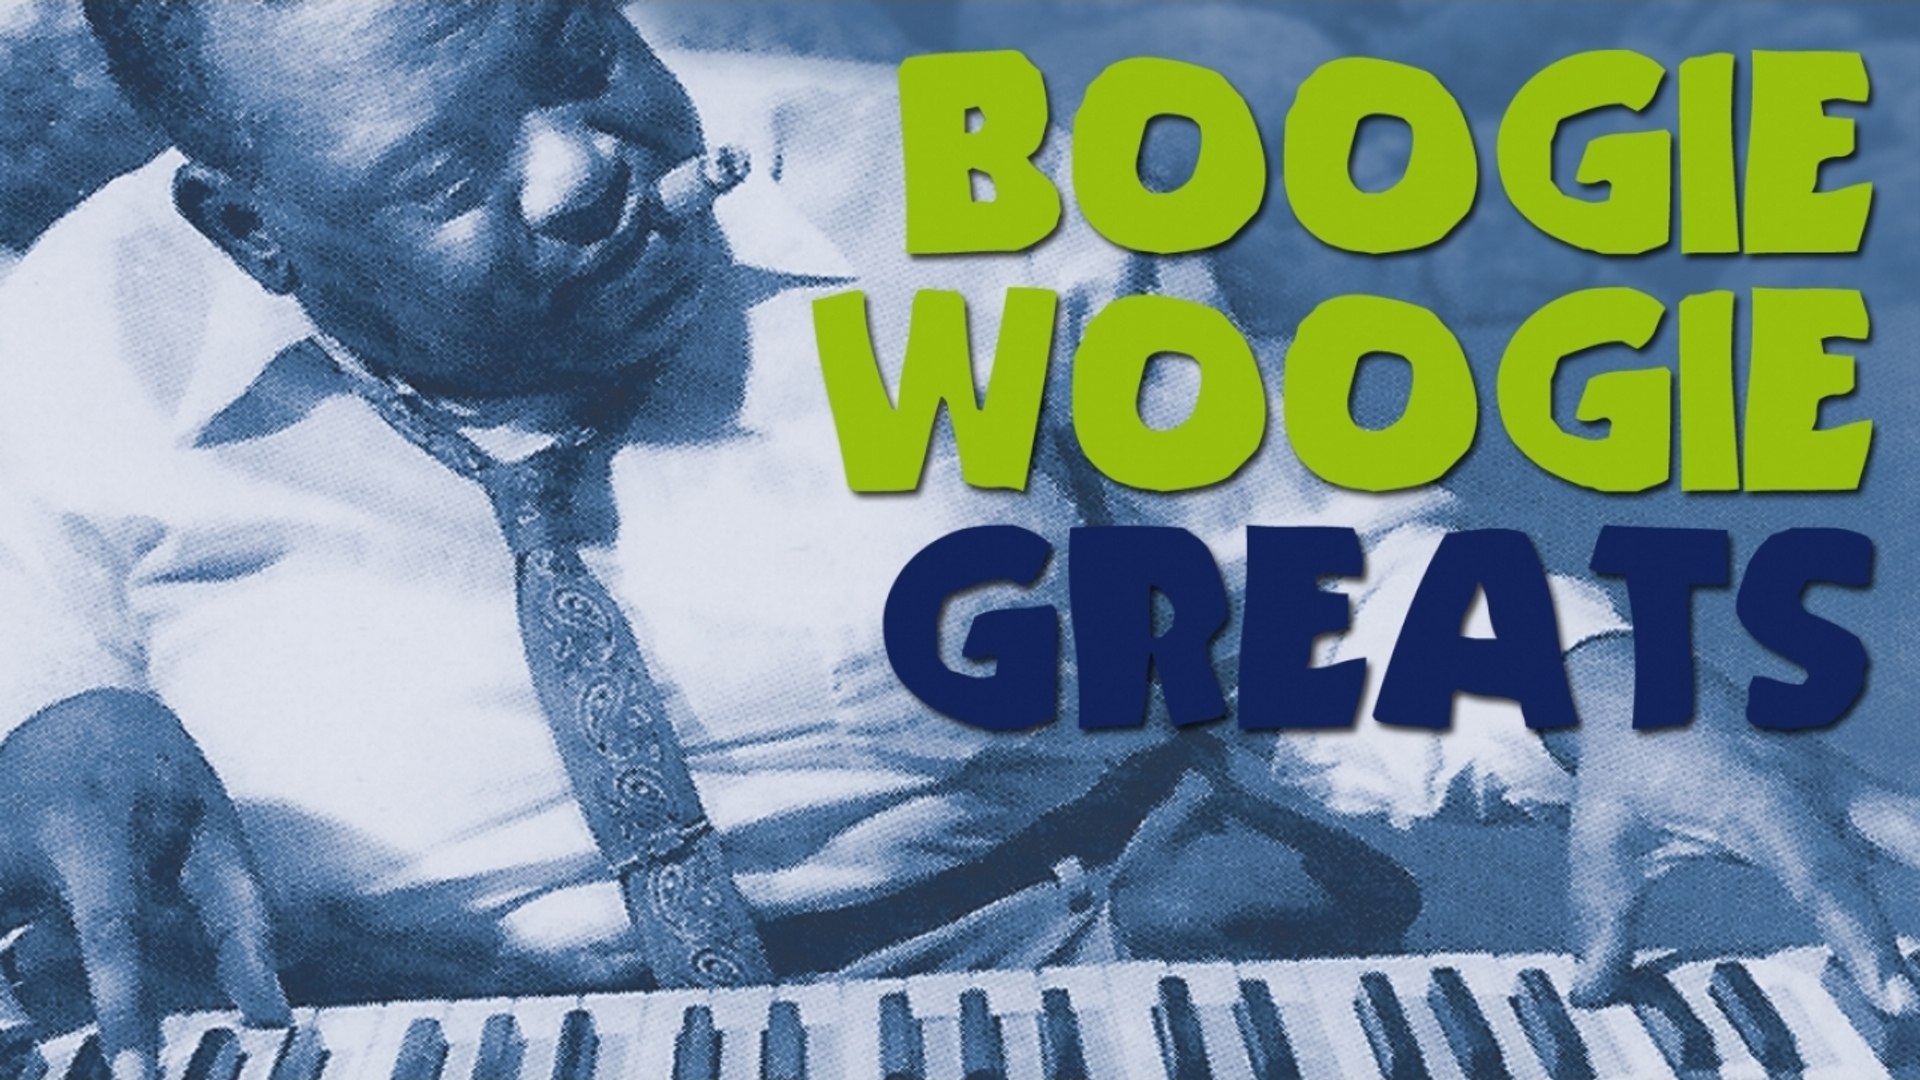 Boogie Woogie Greats - The Best of Boogie Woogie, more than 2 hours of  music with the greatest! - Vidéo Dailymotion